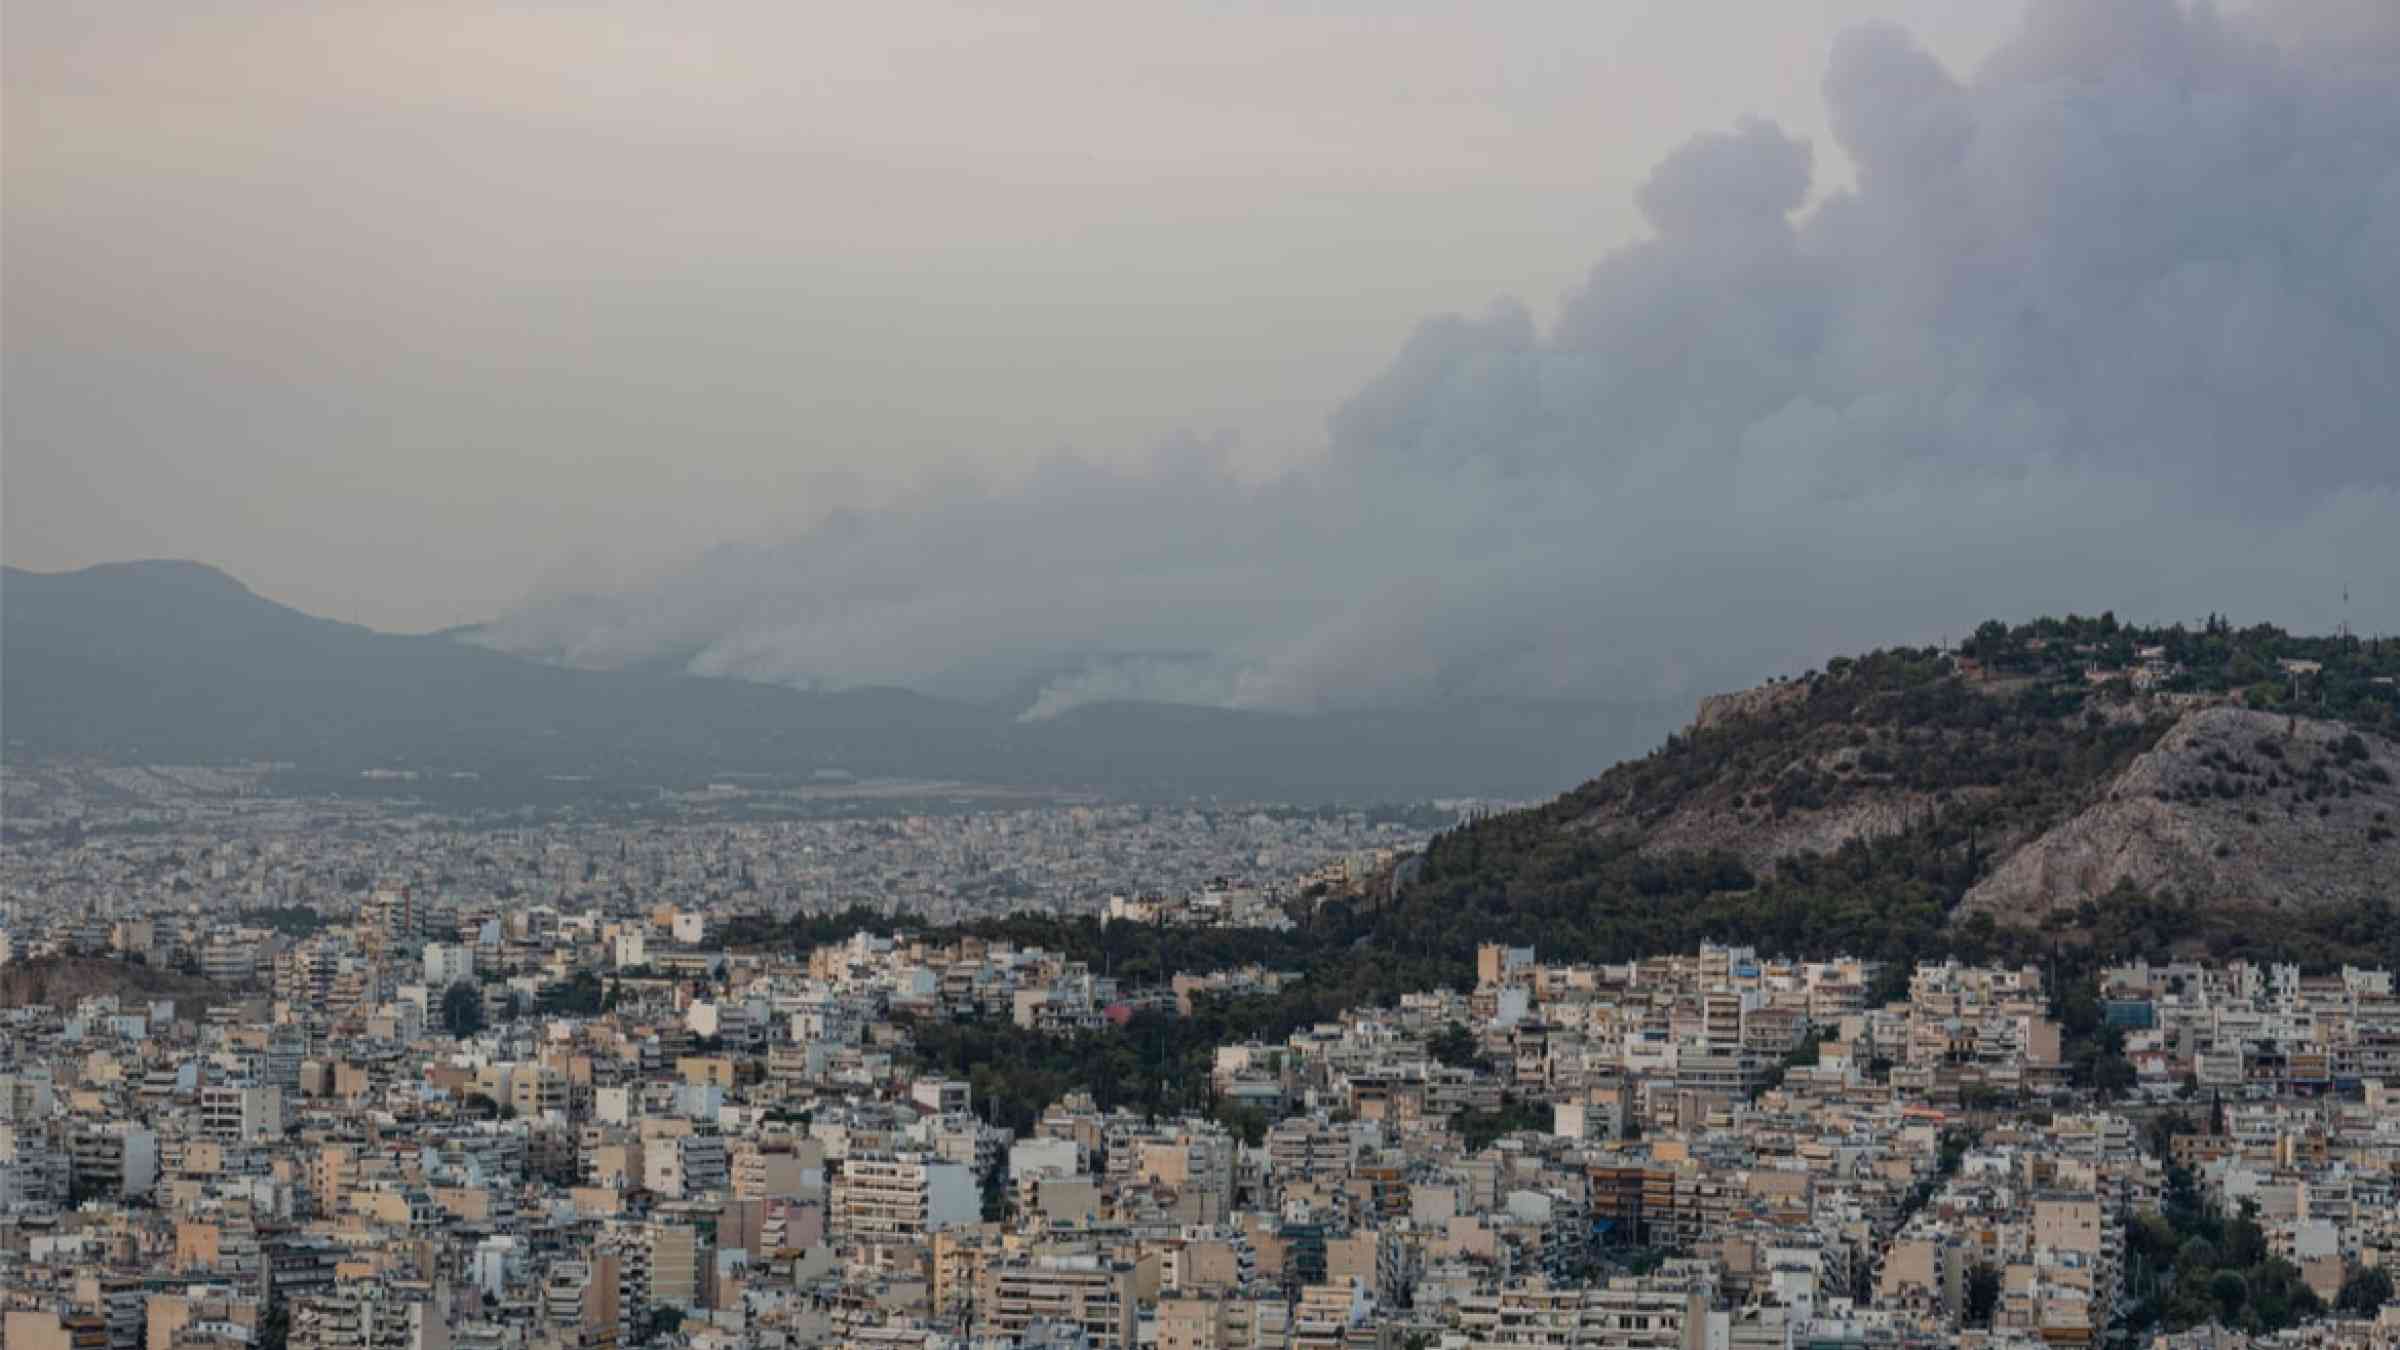 Wildfires north of the city of Athens, Greece (2021)